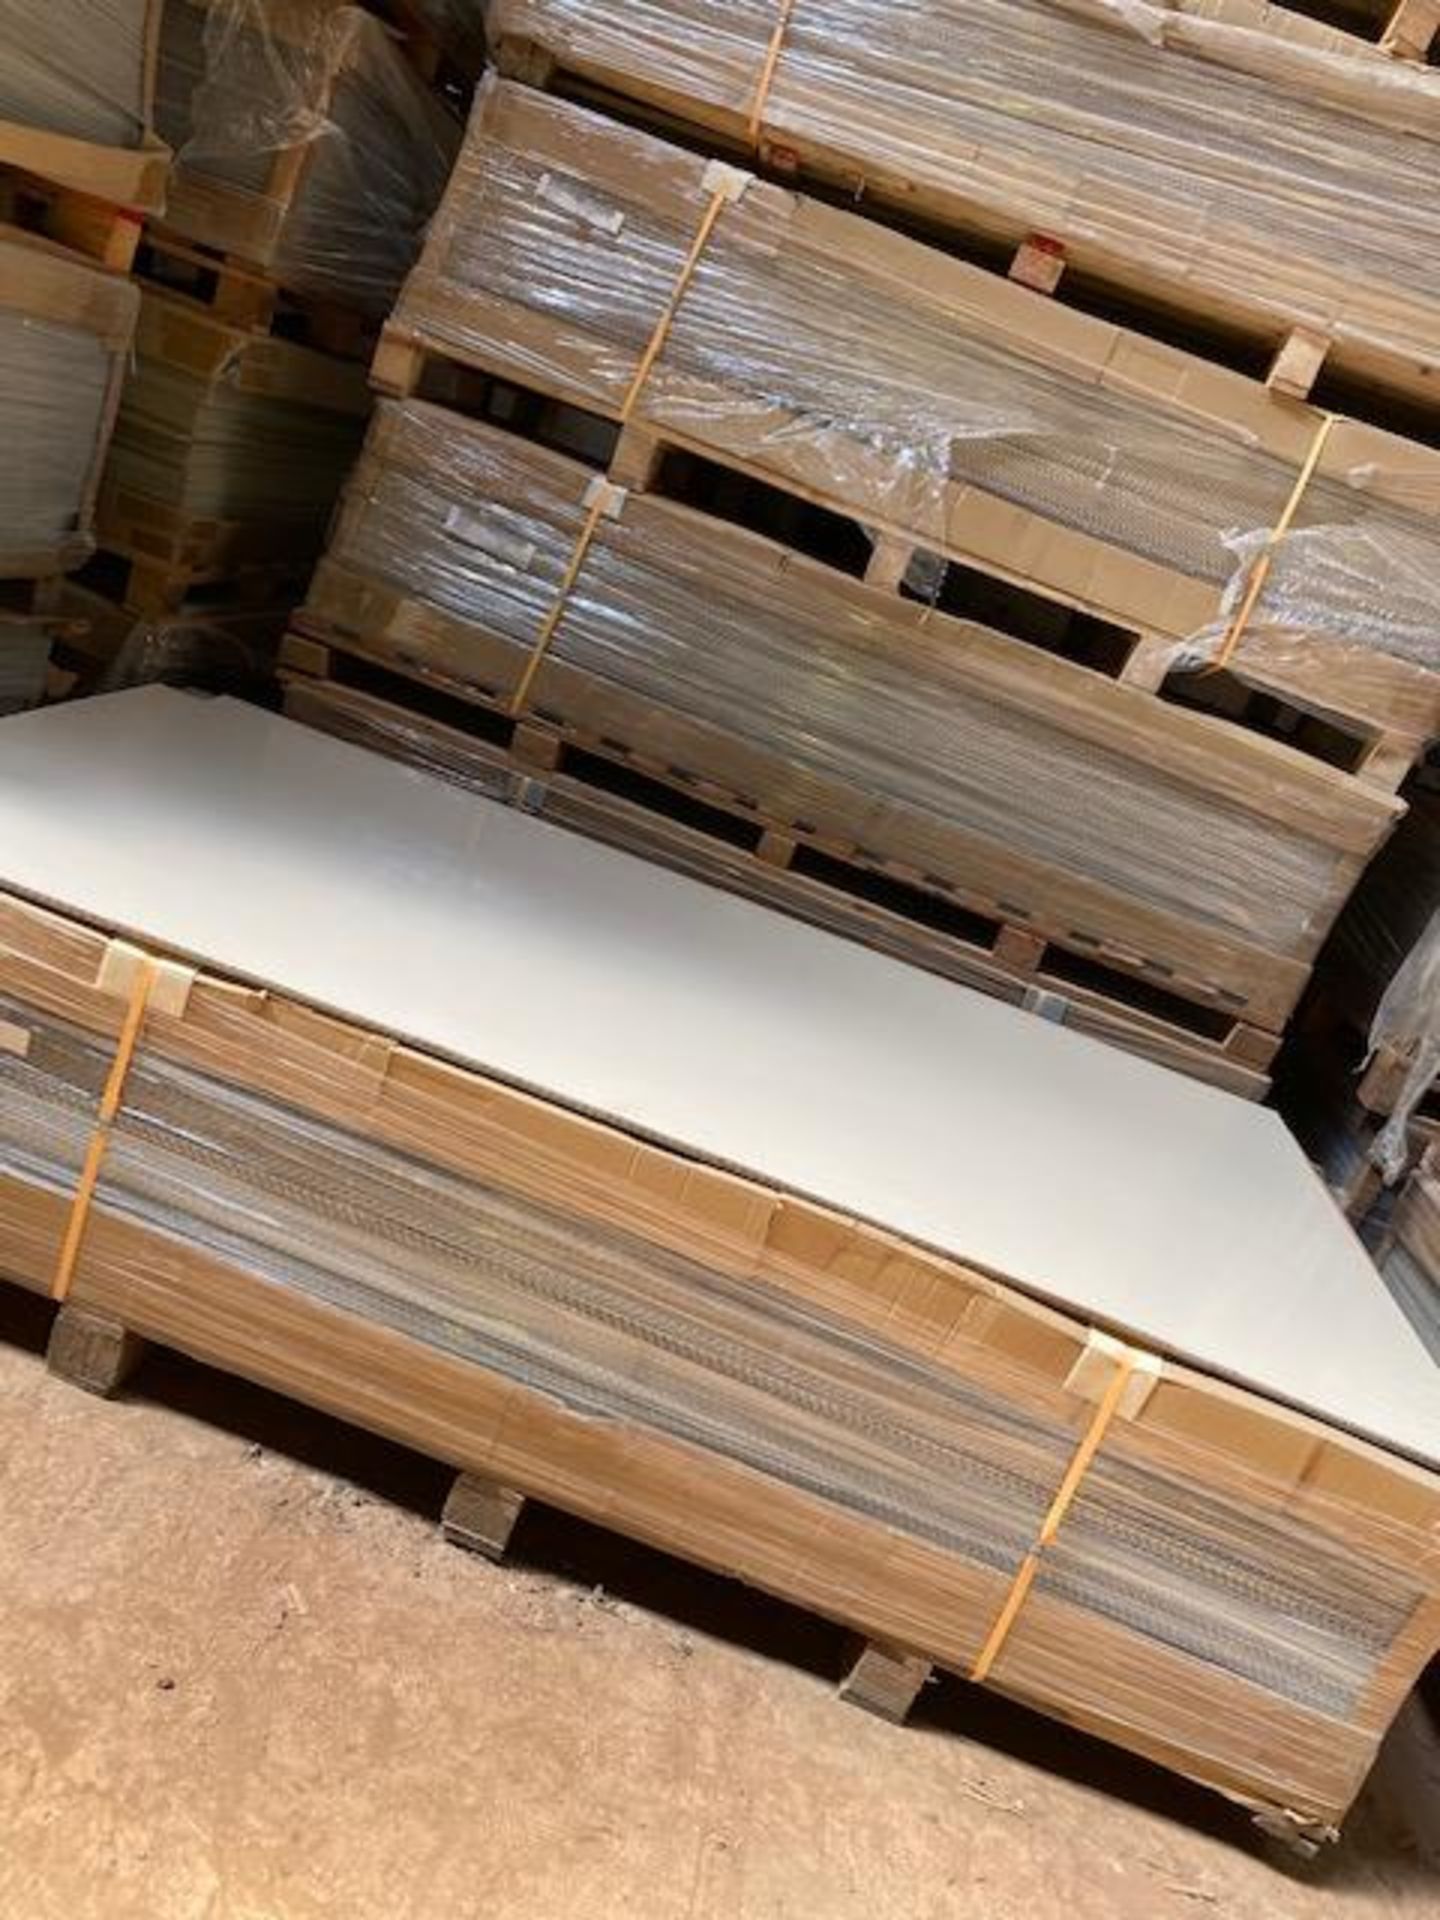 Pallet of White RMD wall panelling, corrugated board, 8ft x 4ft, Approx. 100 boards per pallet (